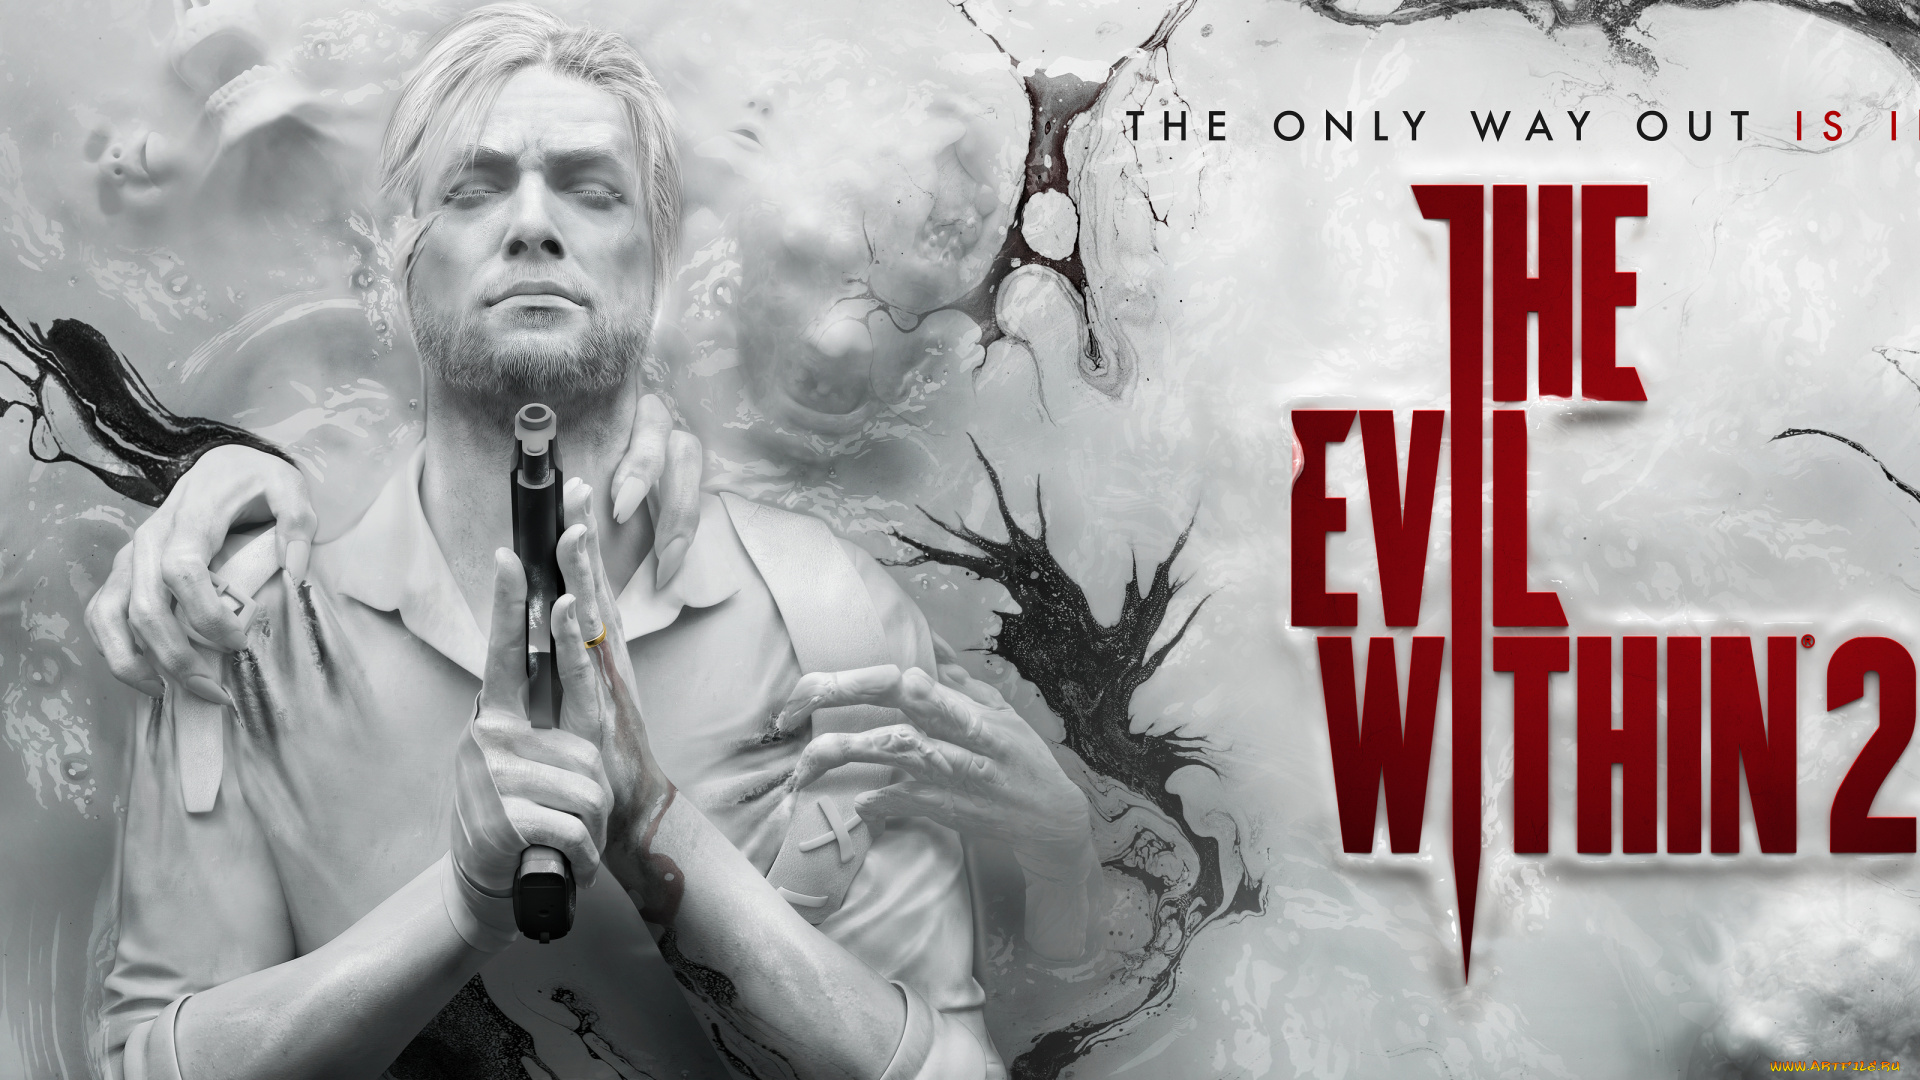 the, evil, within, 2, видео, игры, t, action, horror, the, evil, within, 2, шутер